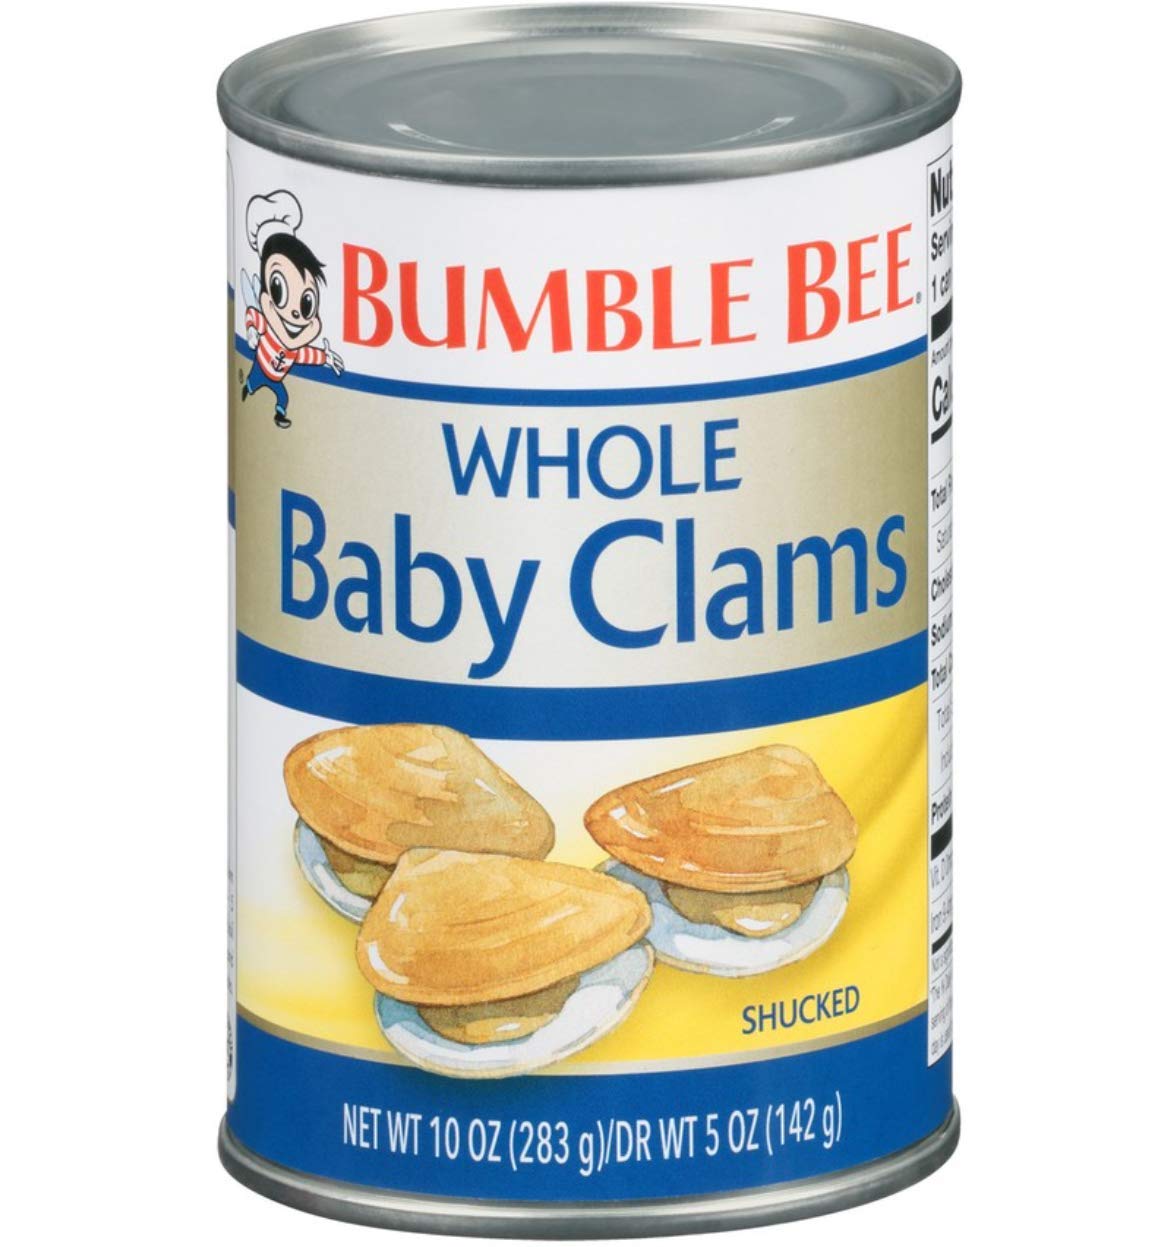 Bumble-Bee-Whole-Baby-Canned-Clams-min